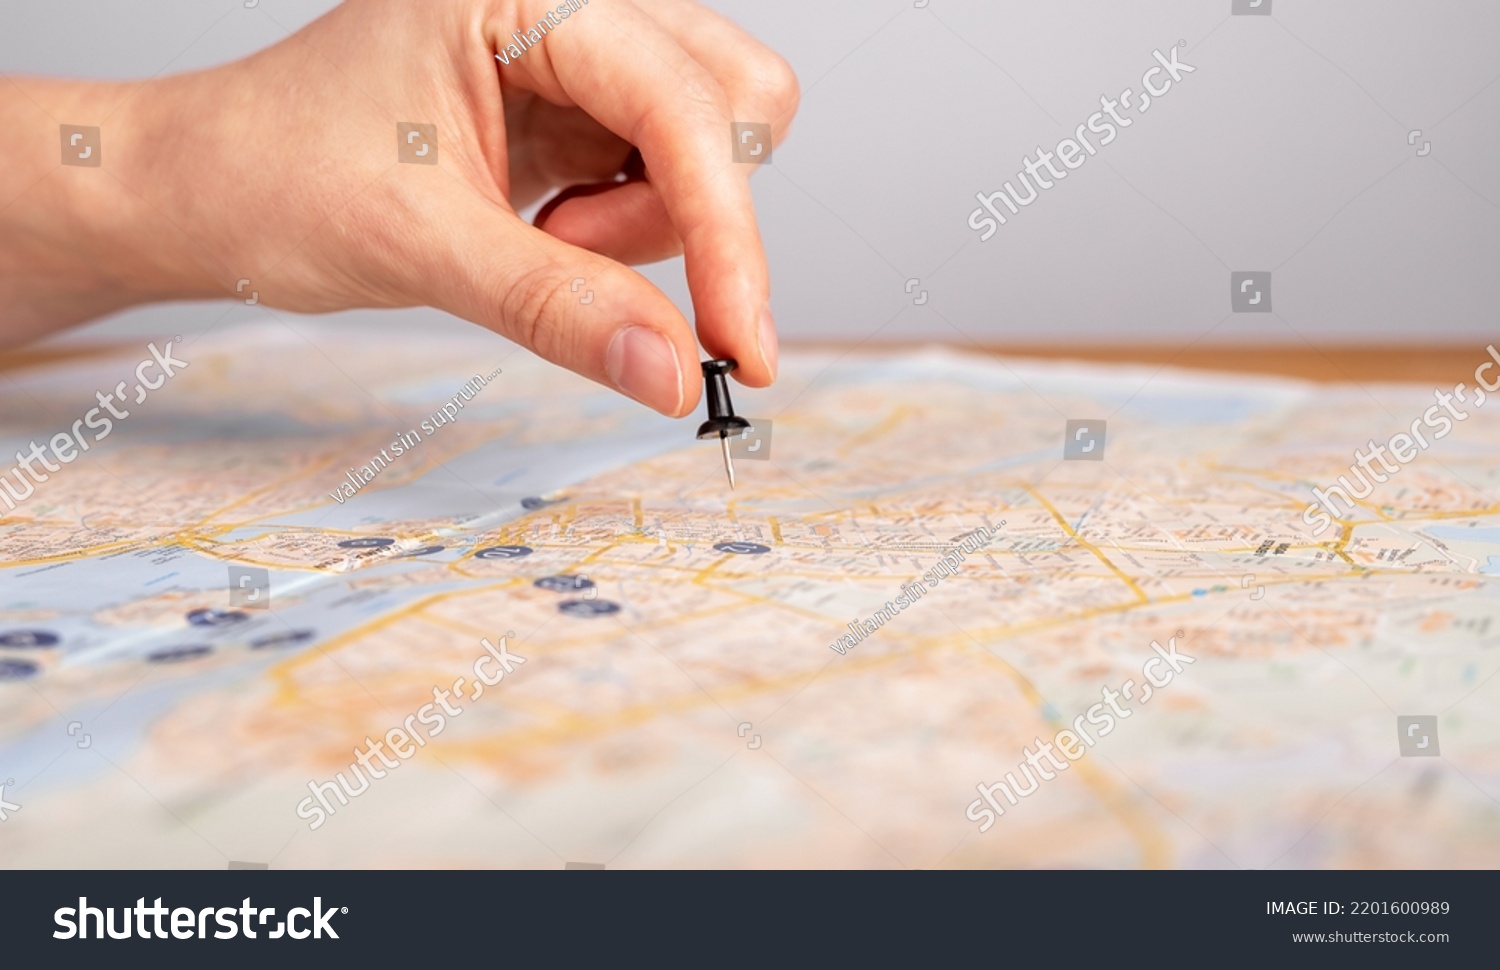 Woman hand pushing pin on map. Trip planning. Female marking travel destination, location with pushpin. Adventure, navigation, logistics concept. High quality photo #2201600989